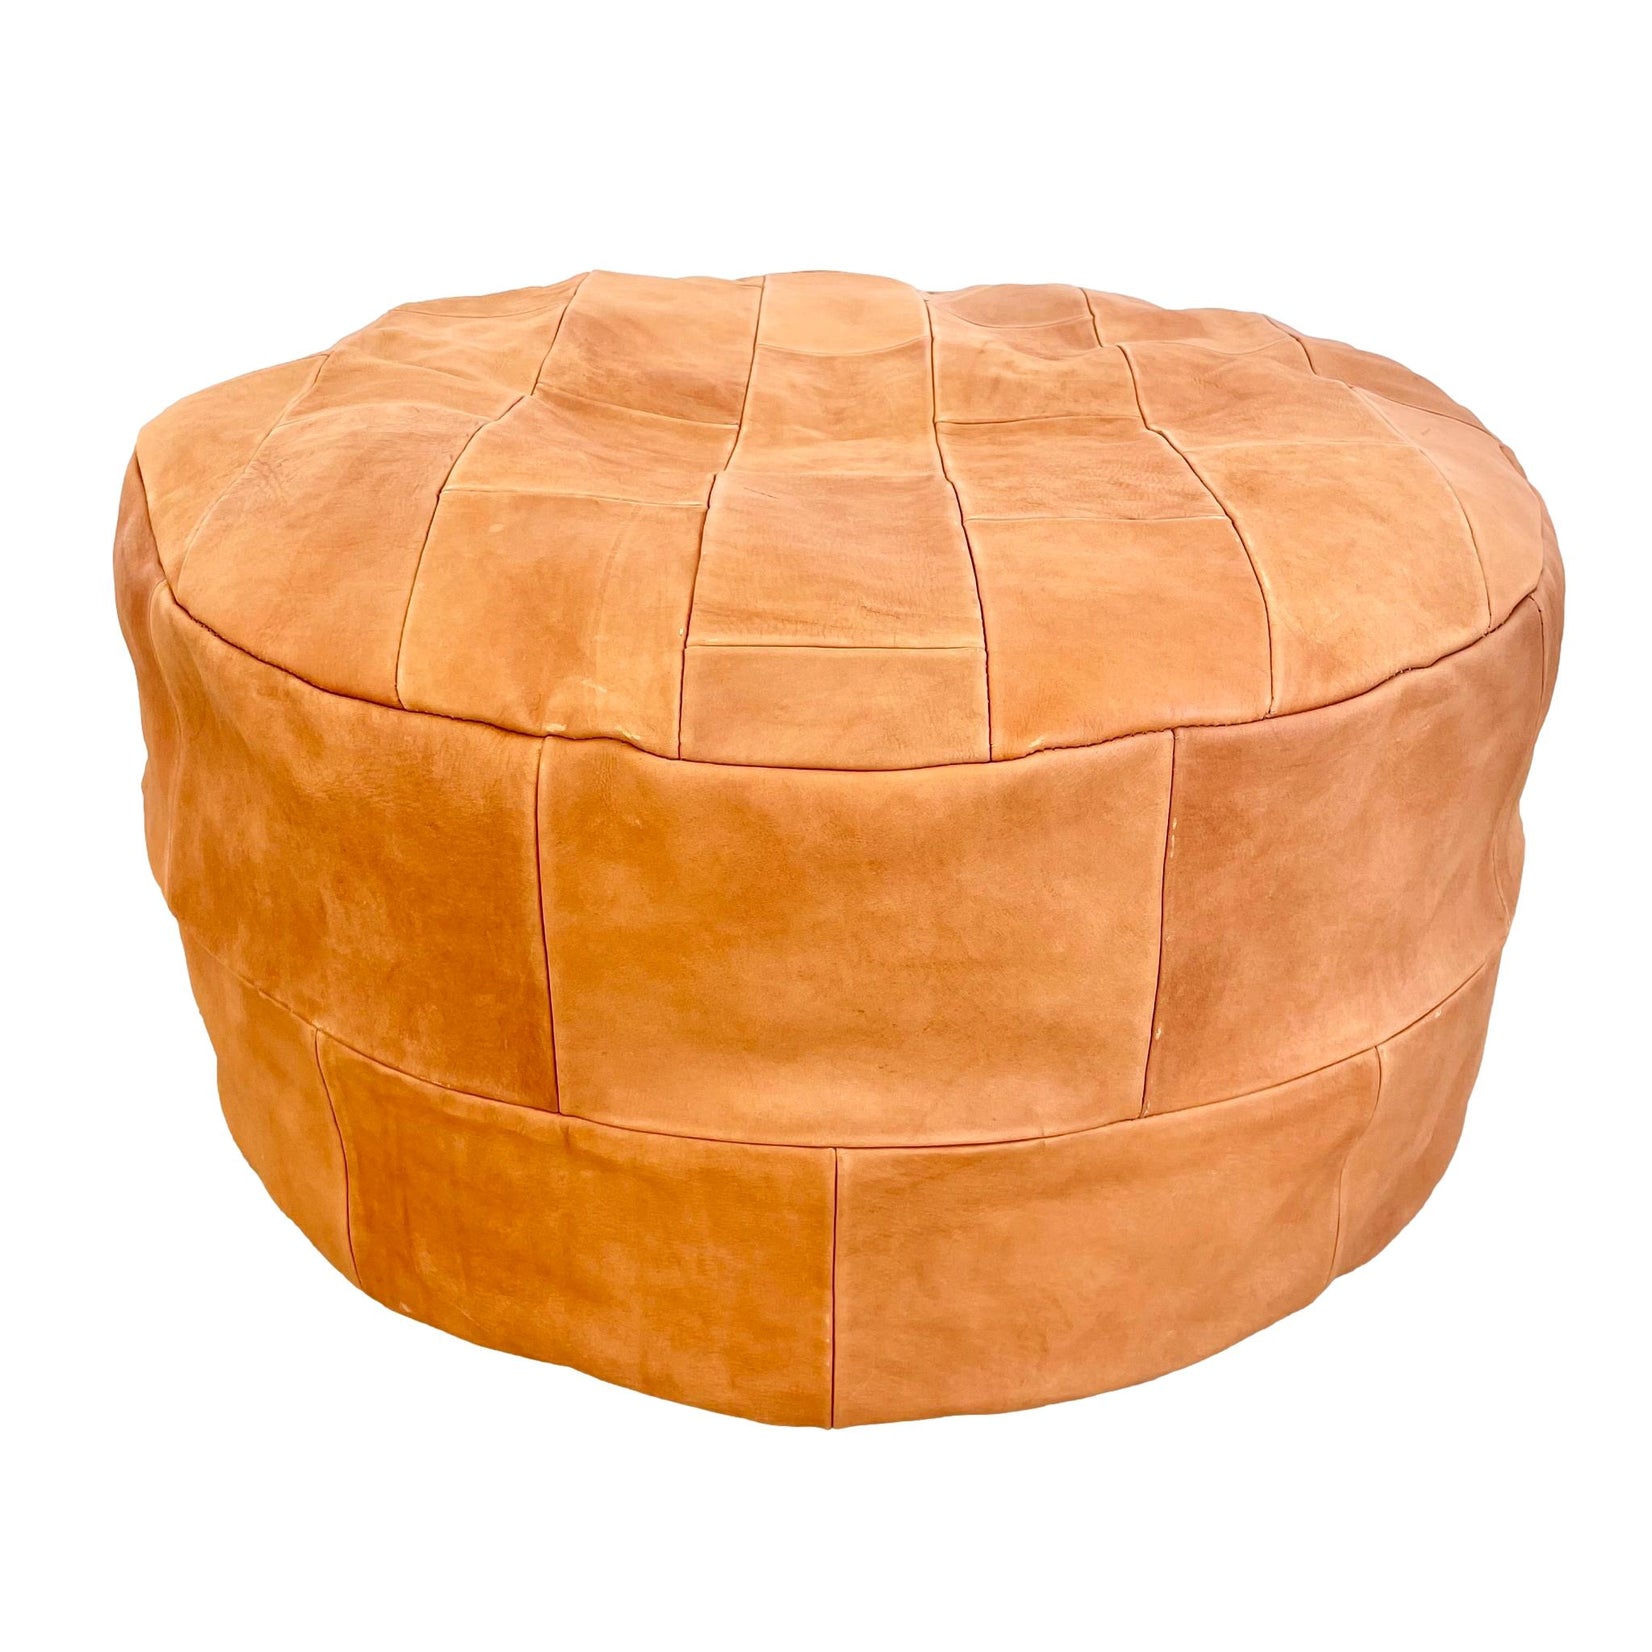 Patchwork Saddle Leather Pouf, Morocco